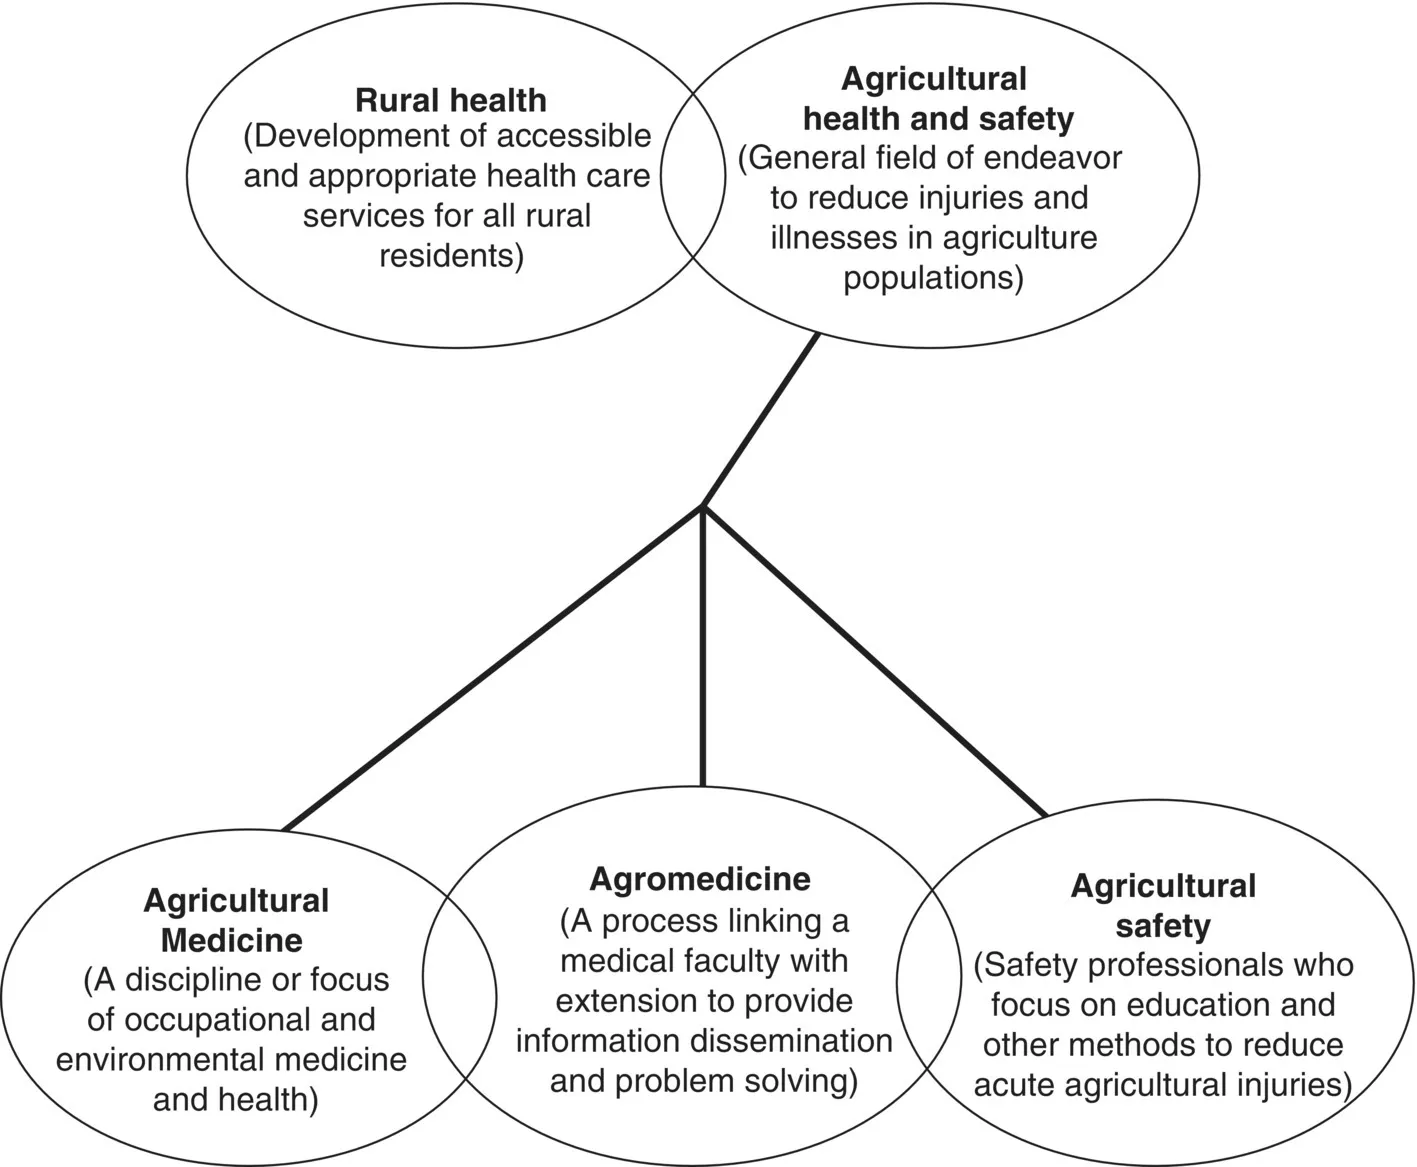 Diagram illustrating the terminologies rural health and agricultural health and safety and their relationships to Agricultural Medicine, Agromedicine, and agricultural safety depicted by linked ovals.